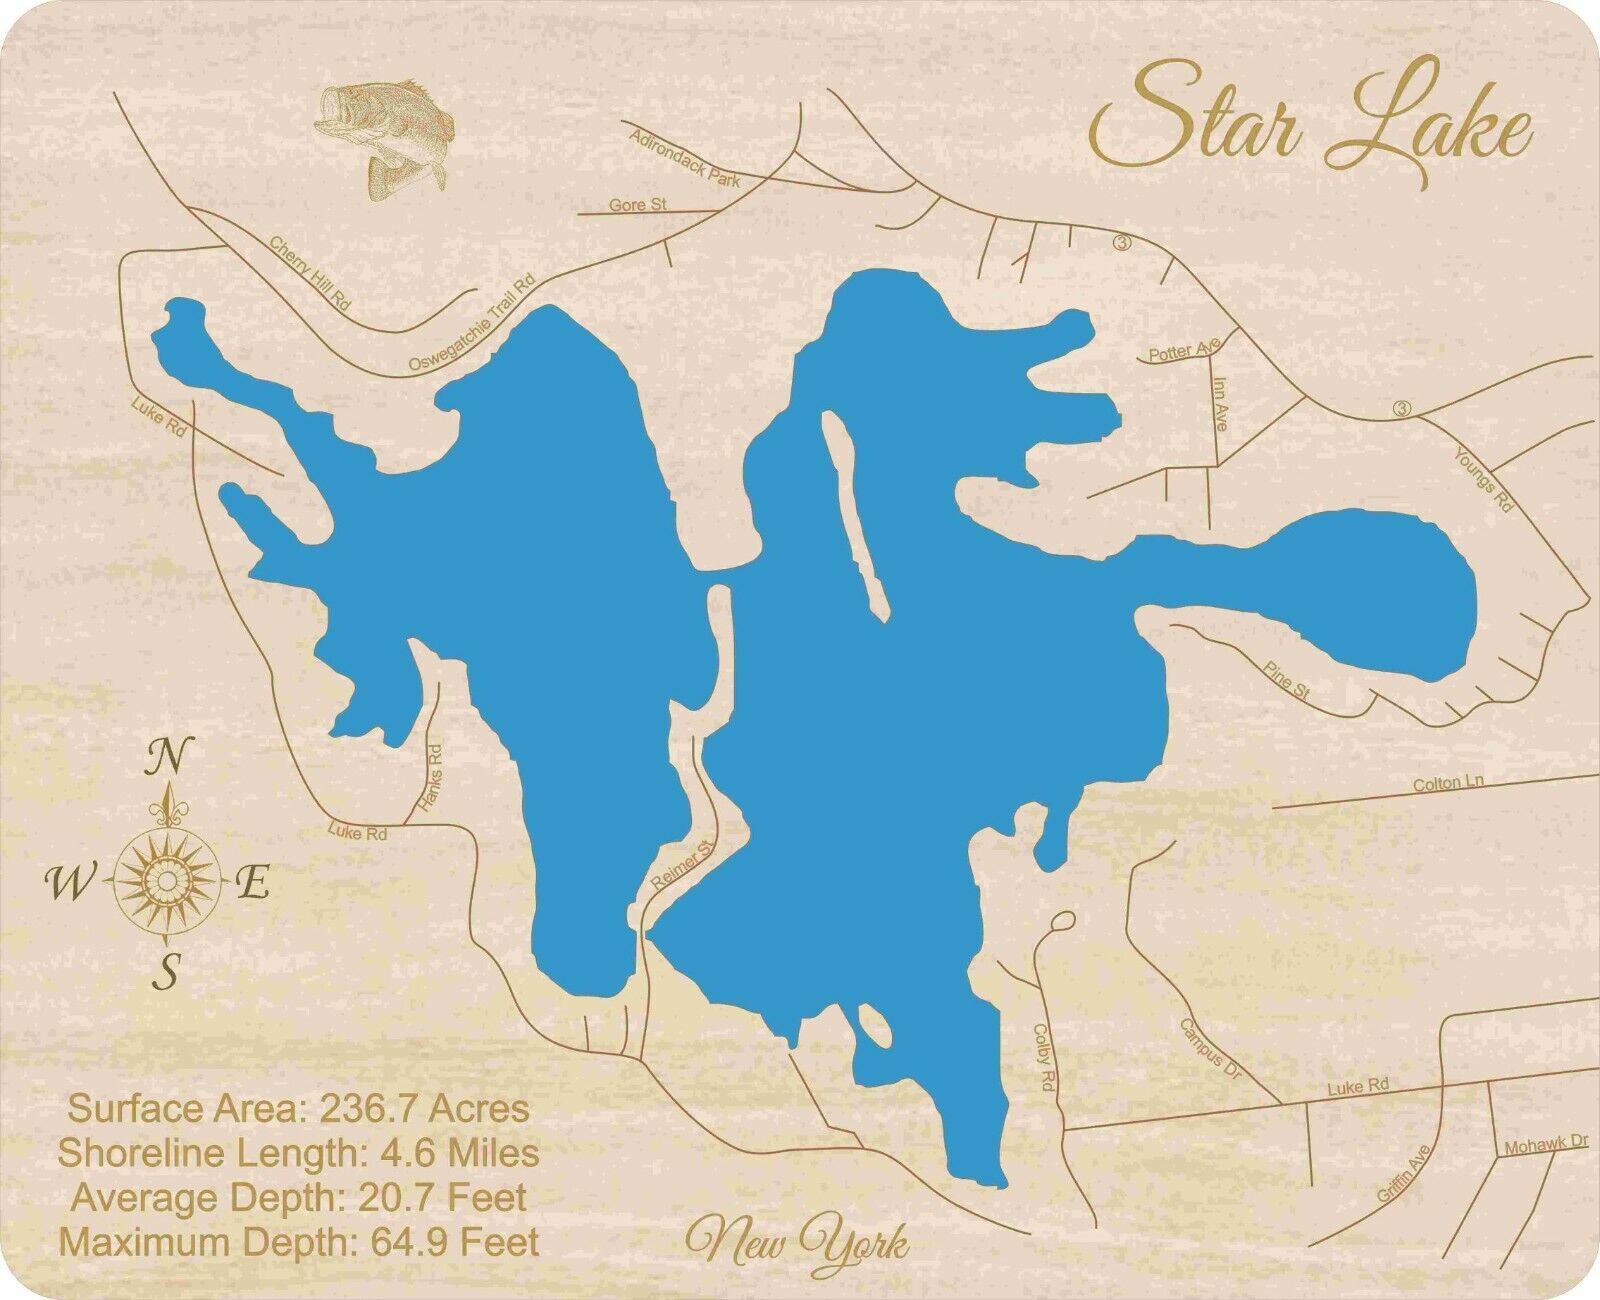 Star Lake, New York – Laser Cut Wood Map | Wall Art | Made To Order | Ebay Pertaining To Most Current Star Lake Wall Art (View 13 of 20)